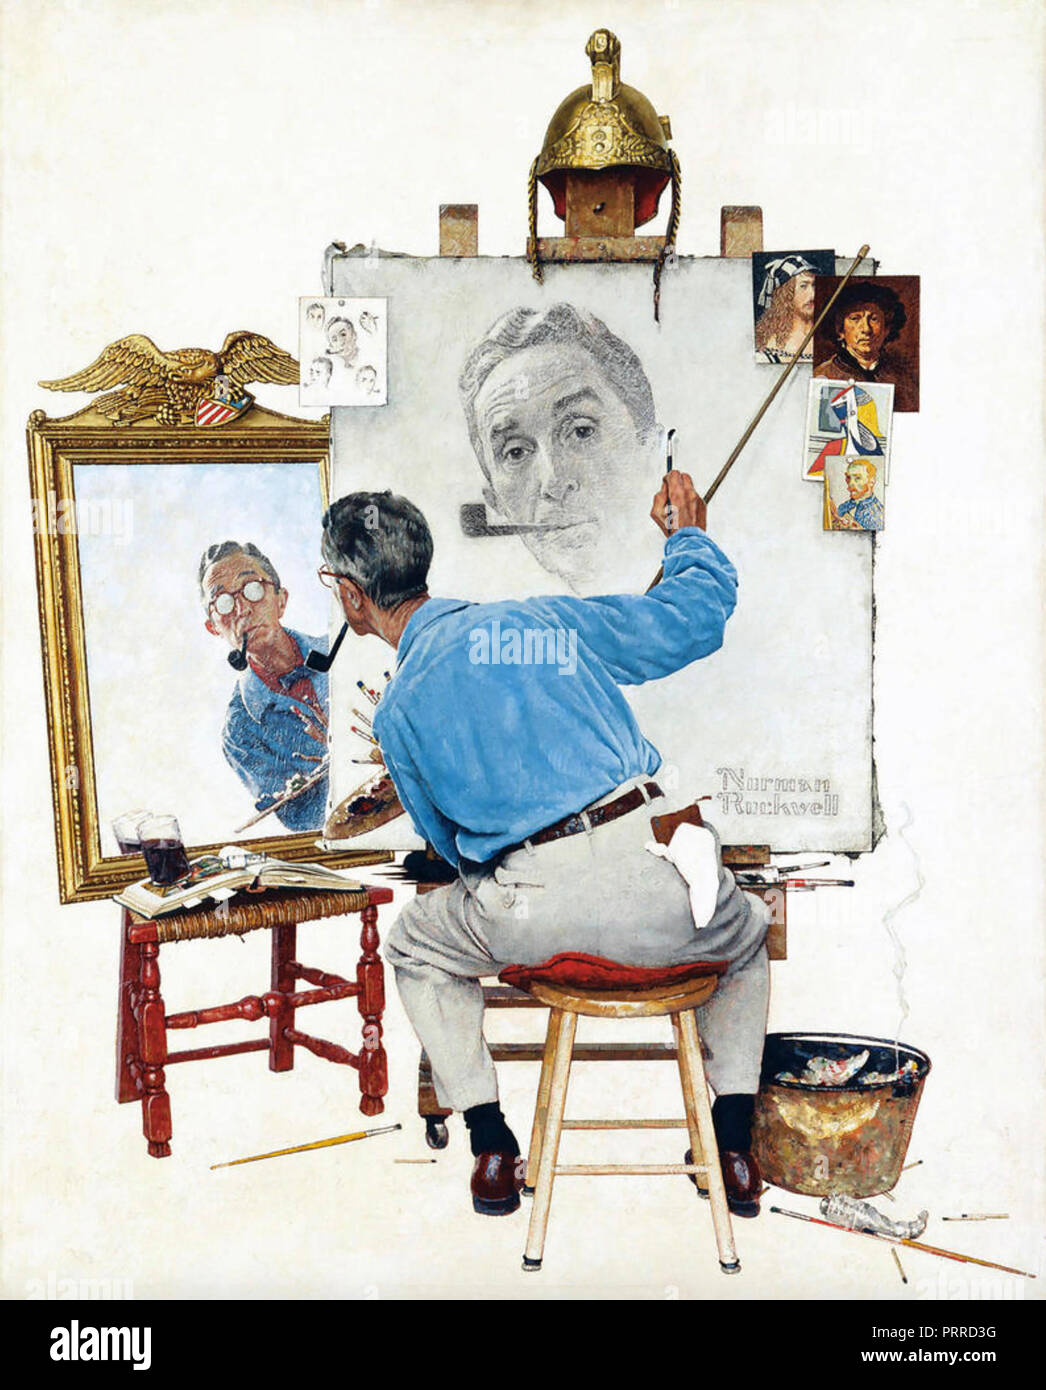 File:Norman Rockwell - Fishing Trip, They'll Be Coming Back Next